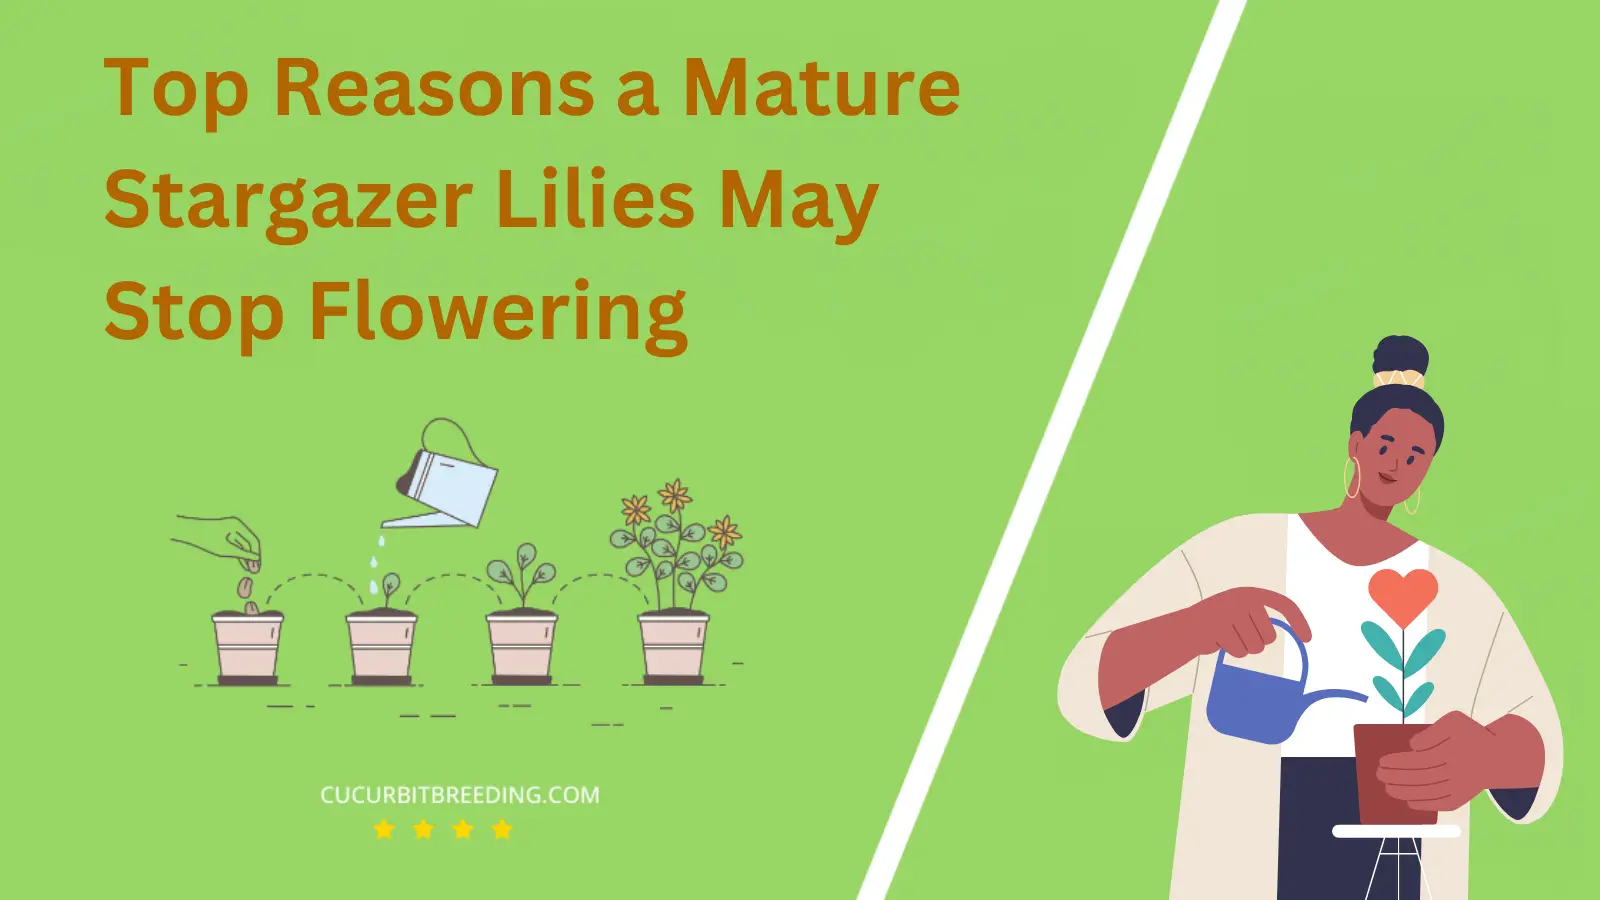 Top Reasons a Mature Stargazer Lilies May Stop Flowering